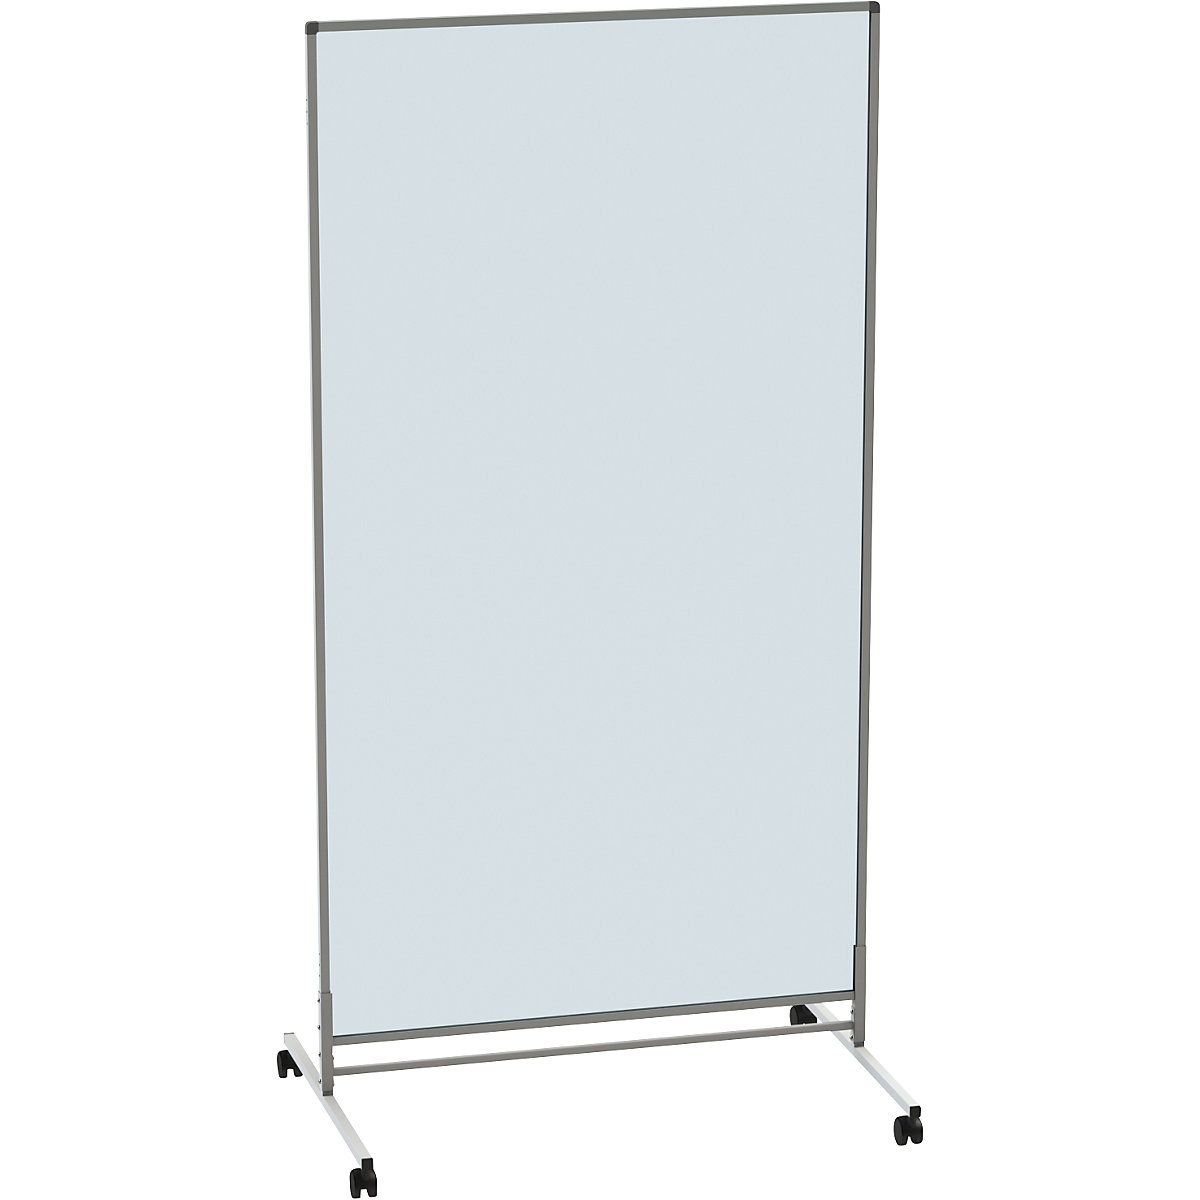 Room divider, transparent and mobile, HxWxD 1950 x 1000 x 650 mm, base element, acrylic glass